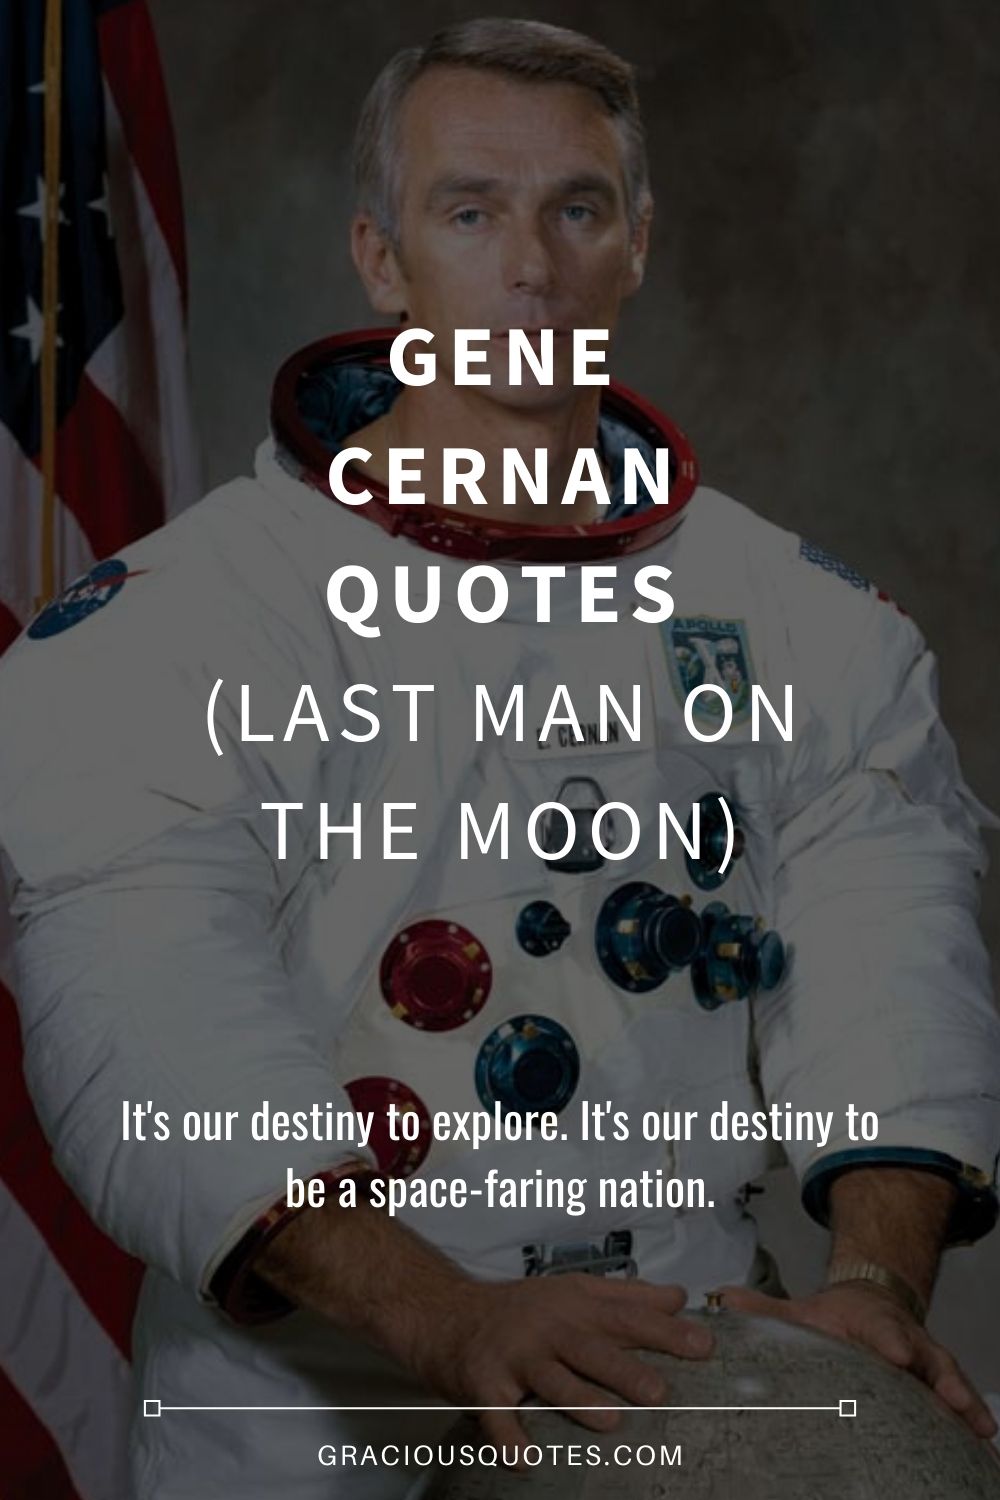 Gene Cernan Quotes (LAST MAN ON THE MOON) - Gracious Quotes